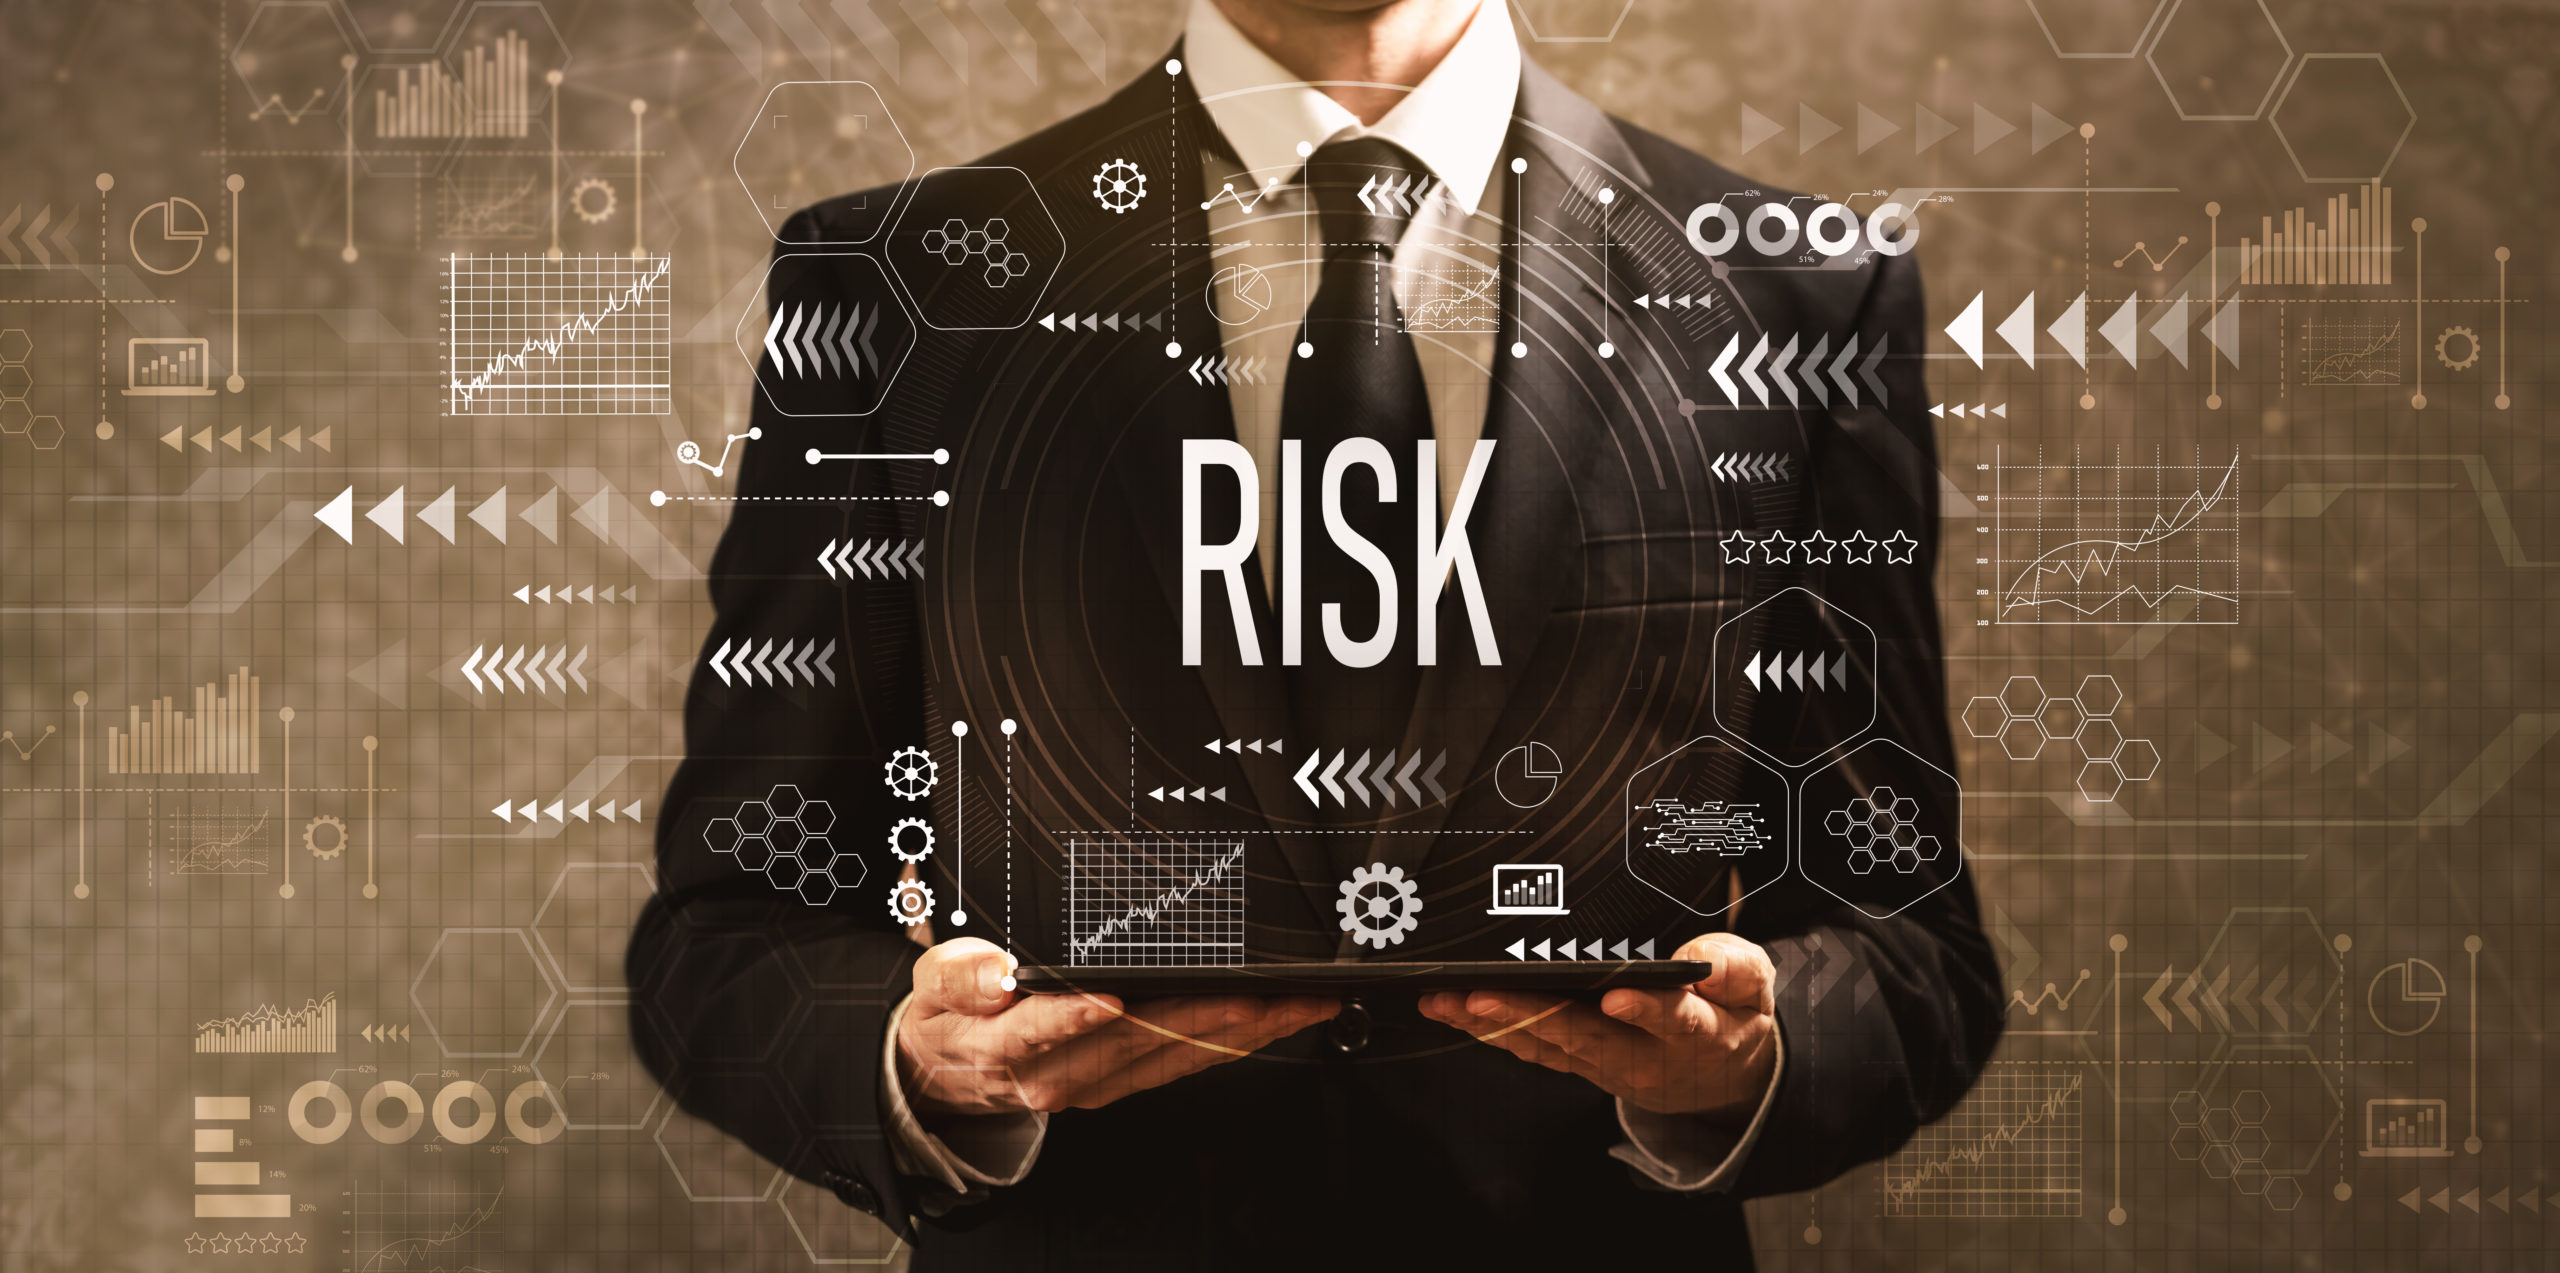 Have you thought about your risk assessment